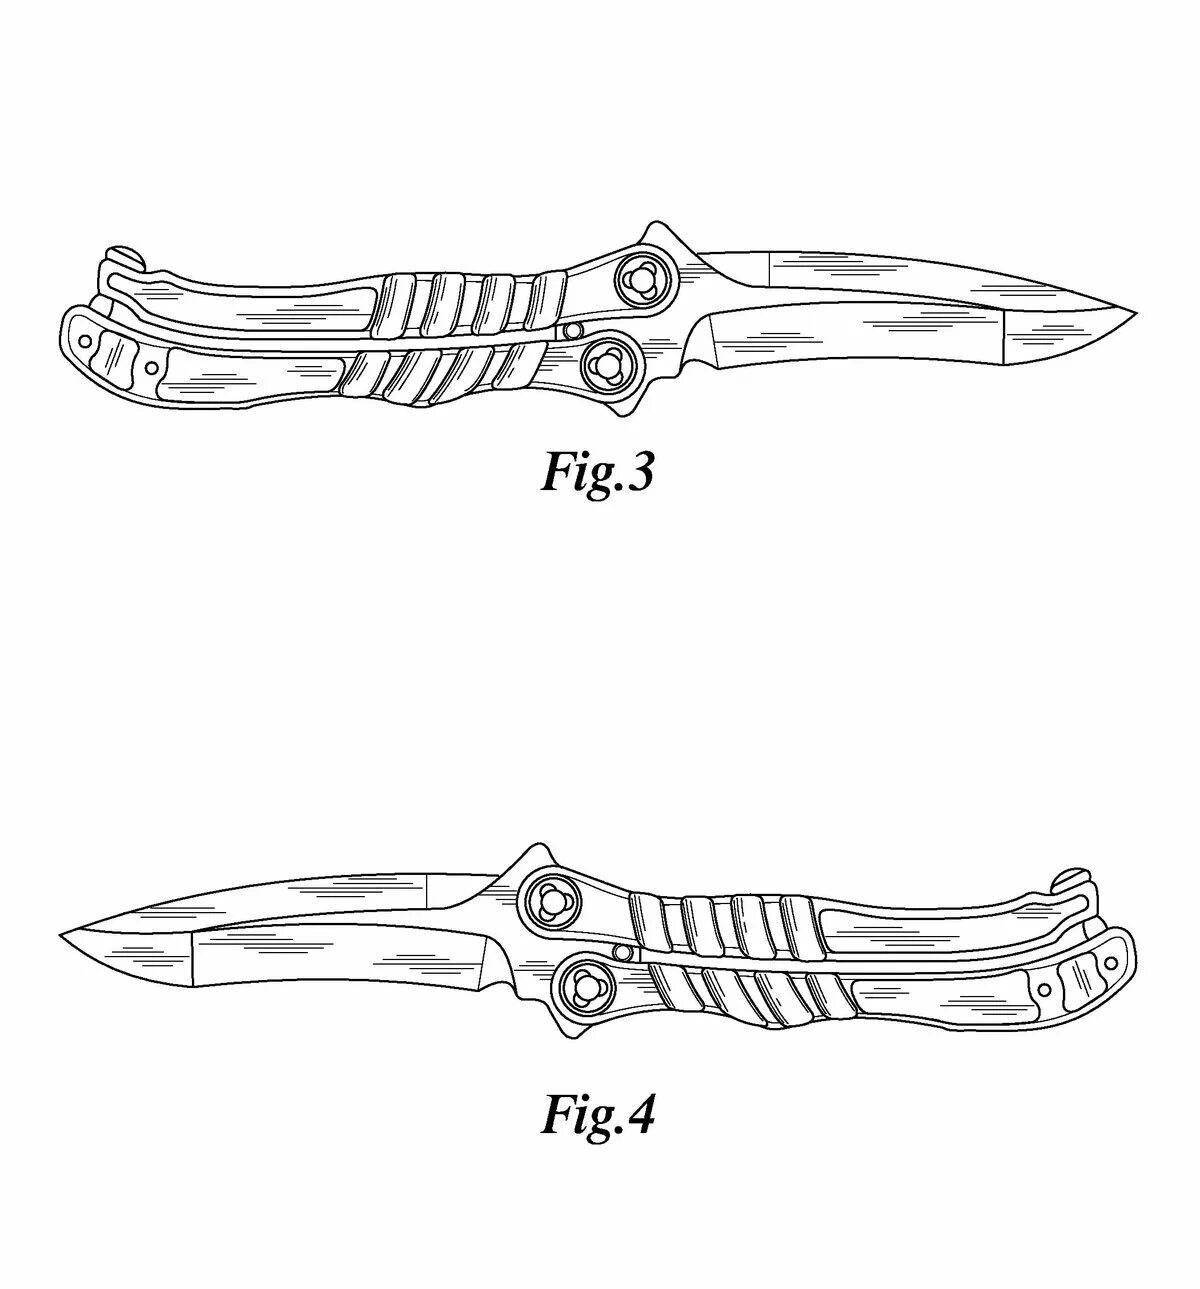 Shining Butterfly Knife Confrontation 2